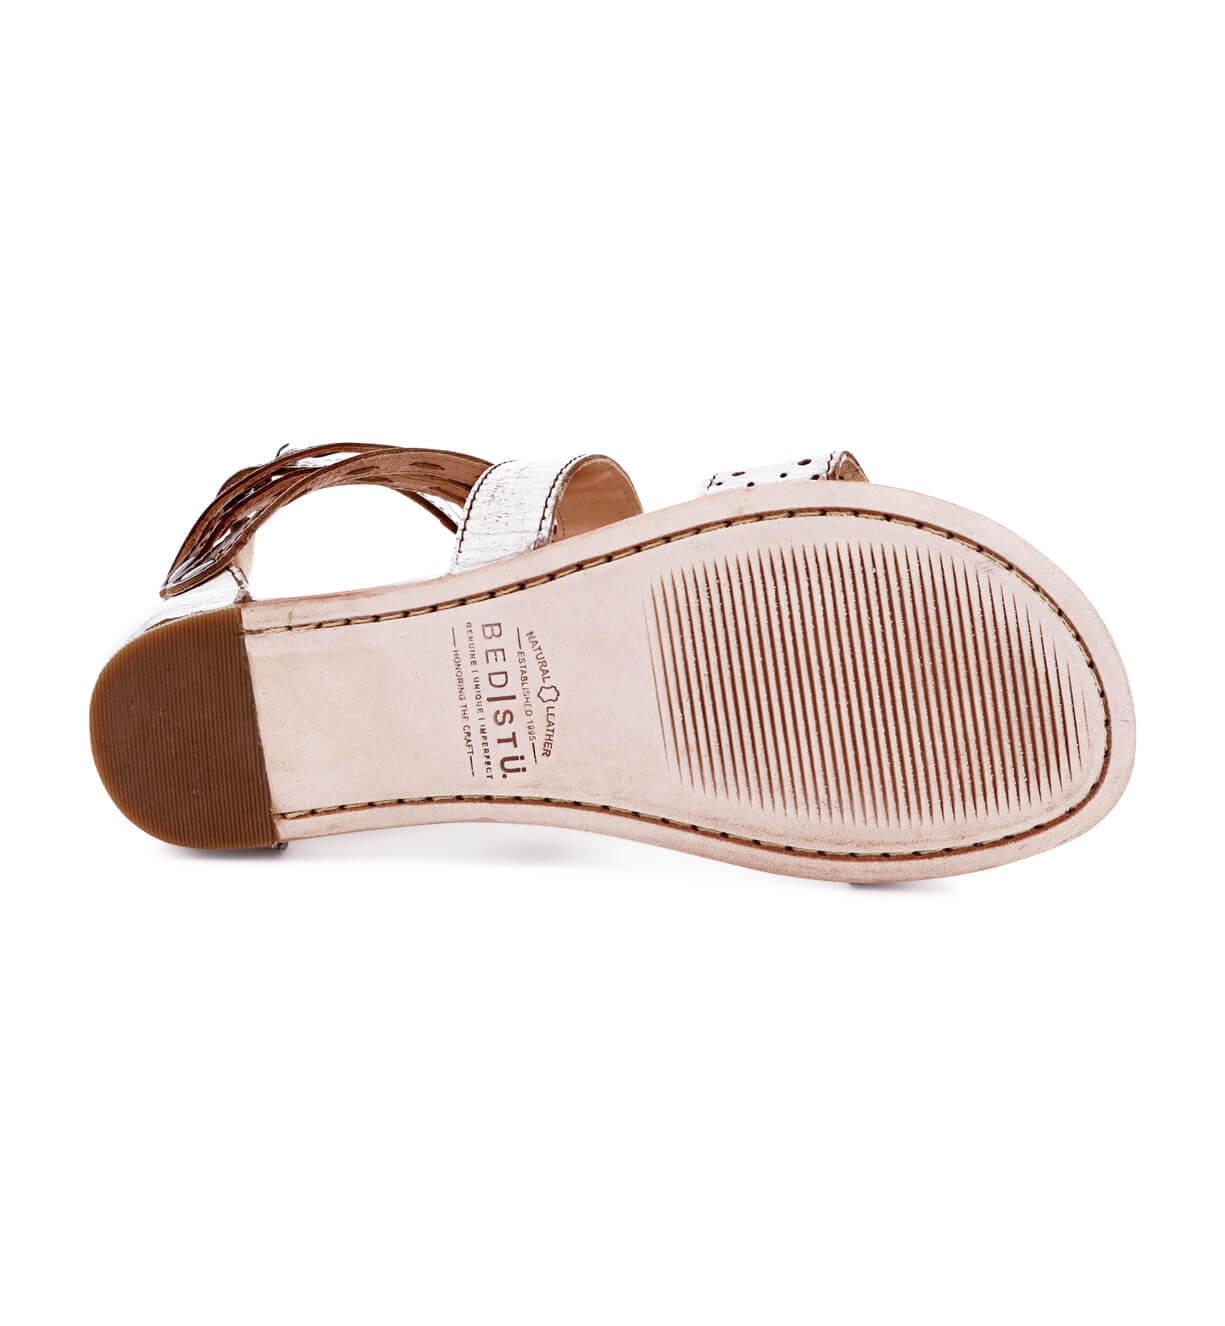 An Artemis sandal by Bed Stu for women with tassels and a white sole.